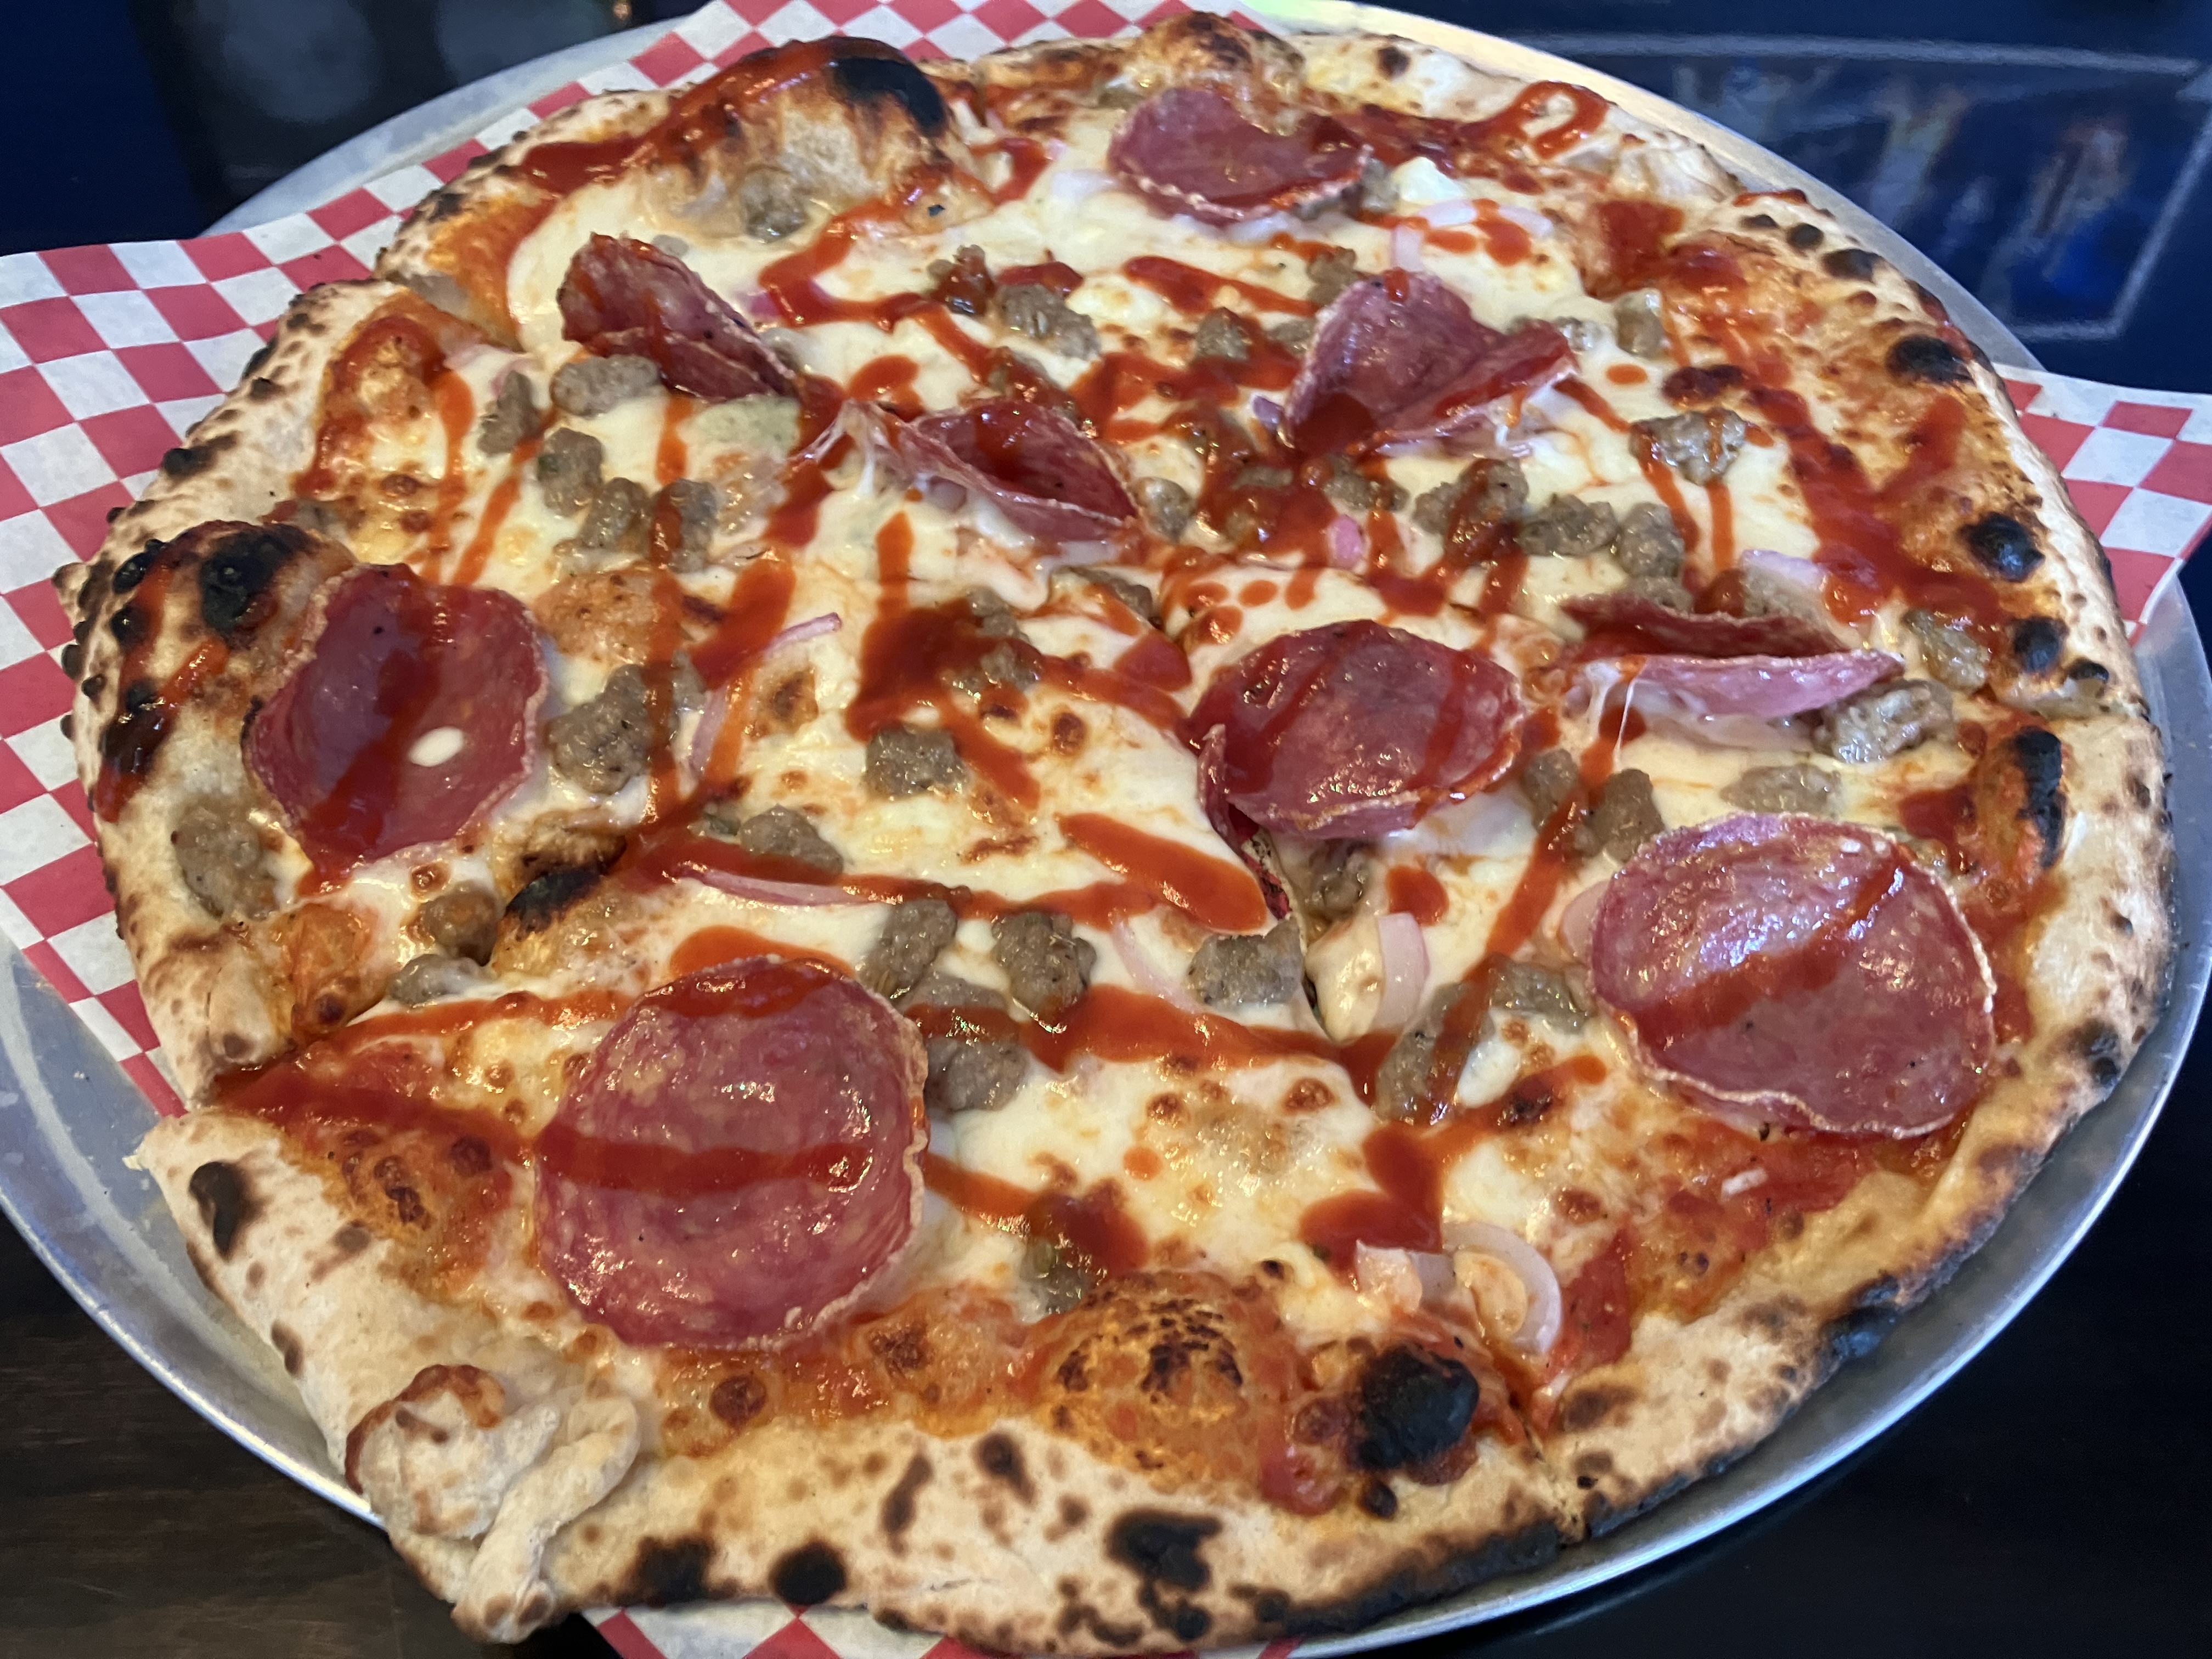 The Alabama pizza place built on 'a pie and a prayer' 